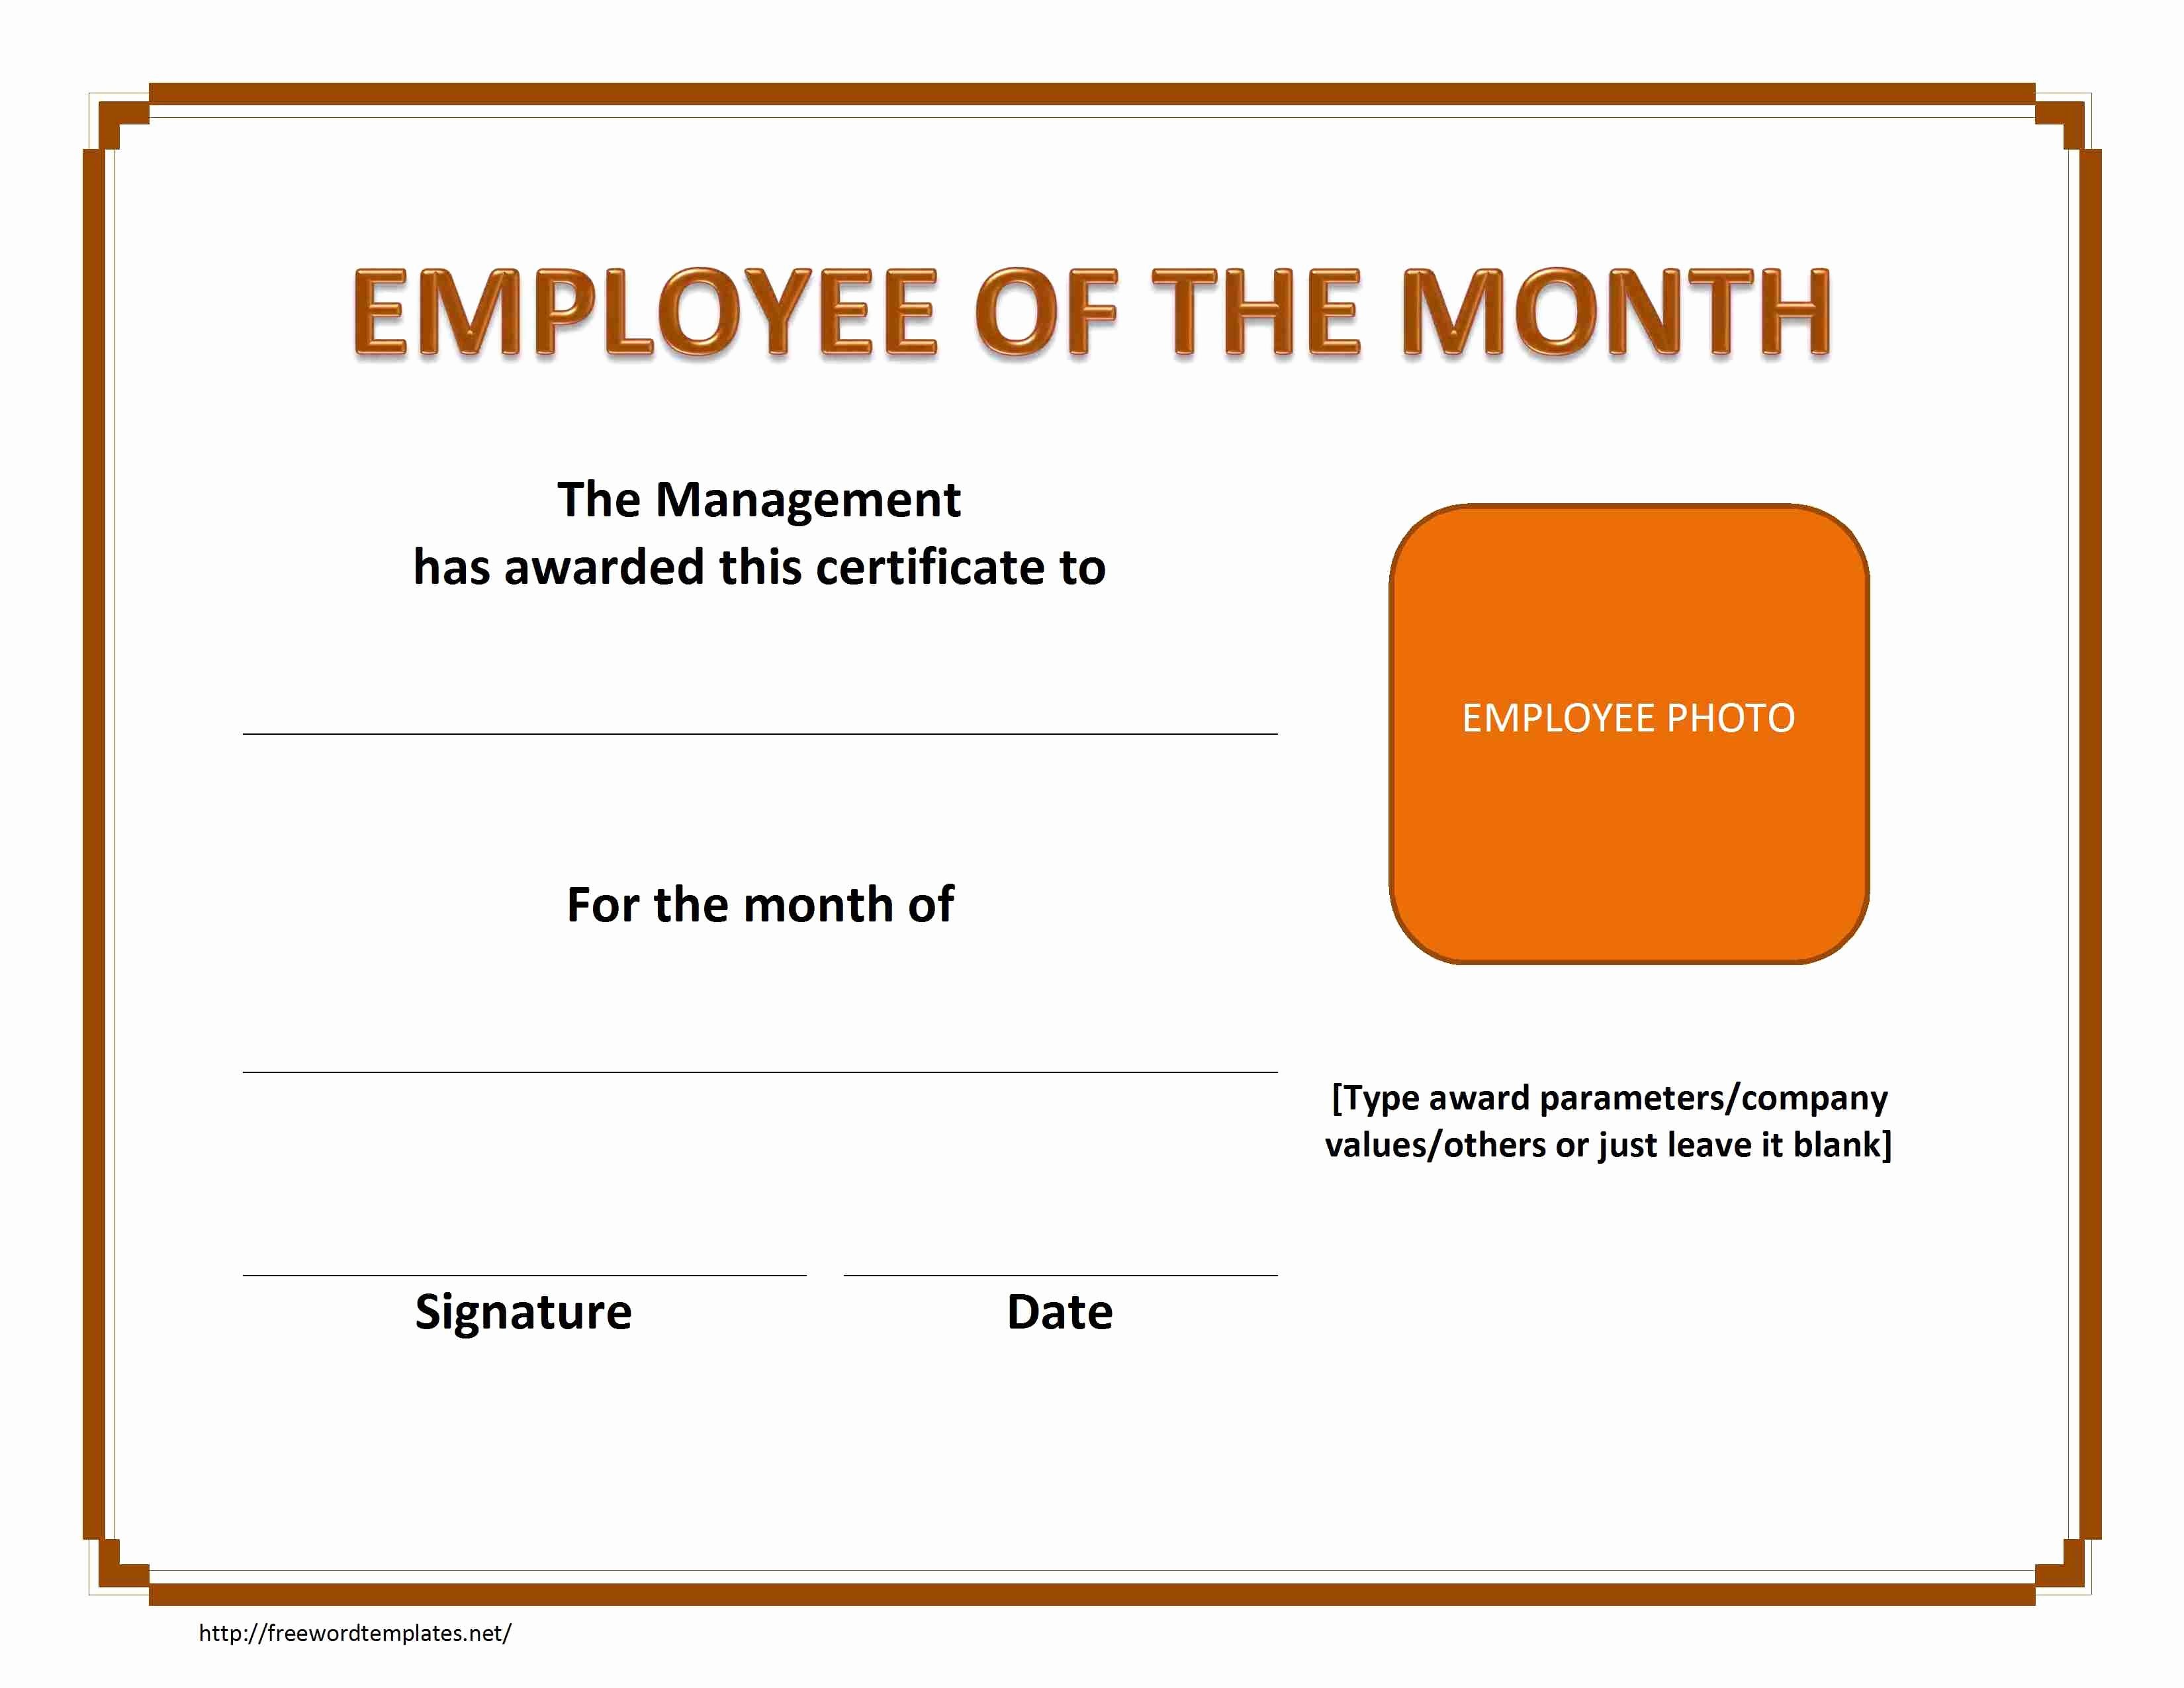 Employee Of the Month Nomination form Template New 37 Awesome Award and Certificate Design Templates for